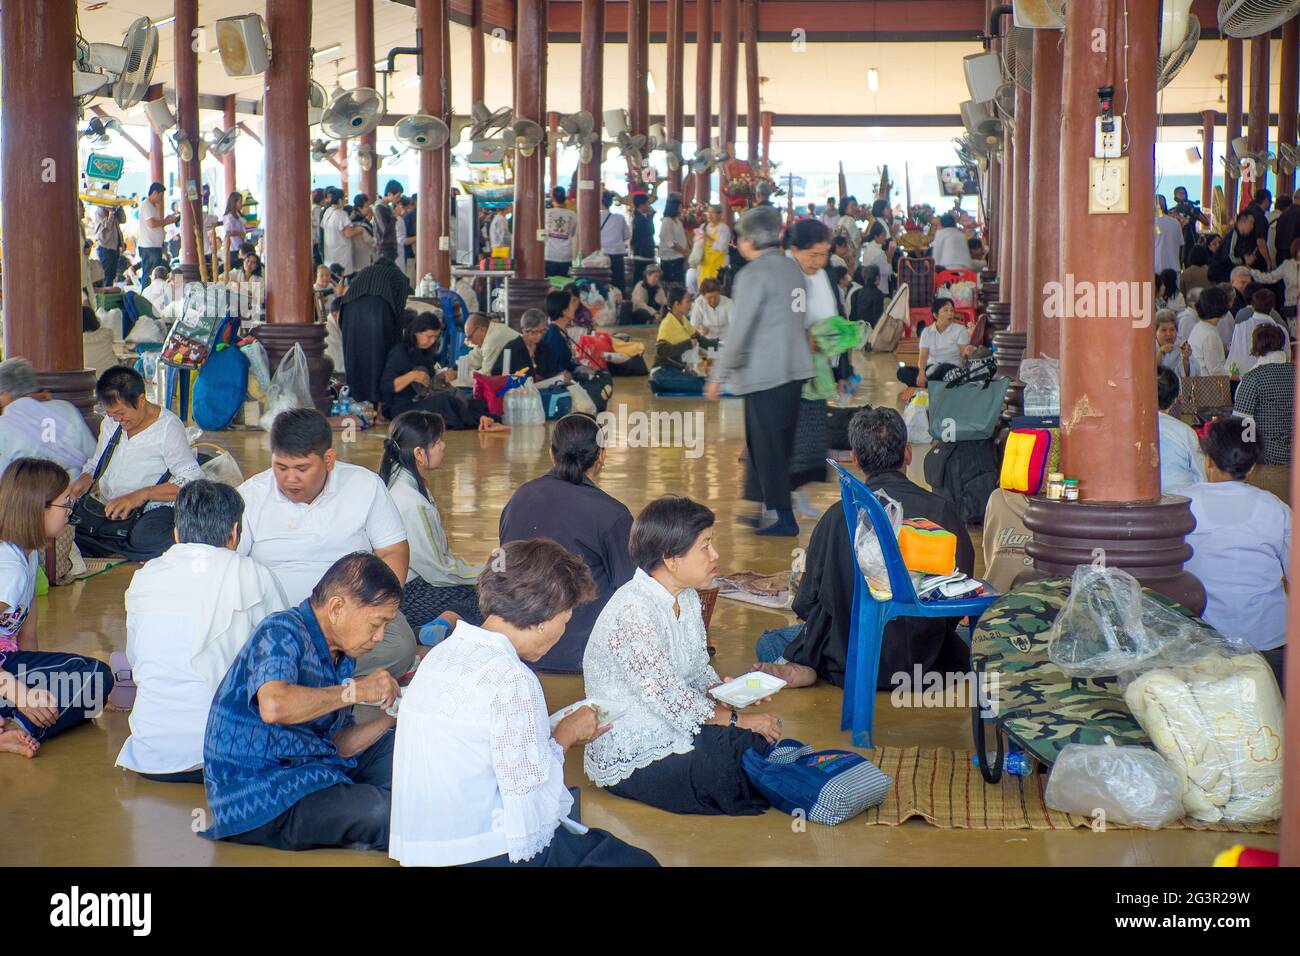 Udon Thani/Thailand-03.02.2017:The hall full of people who are eating Stock Photo